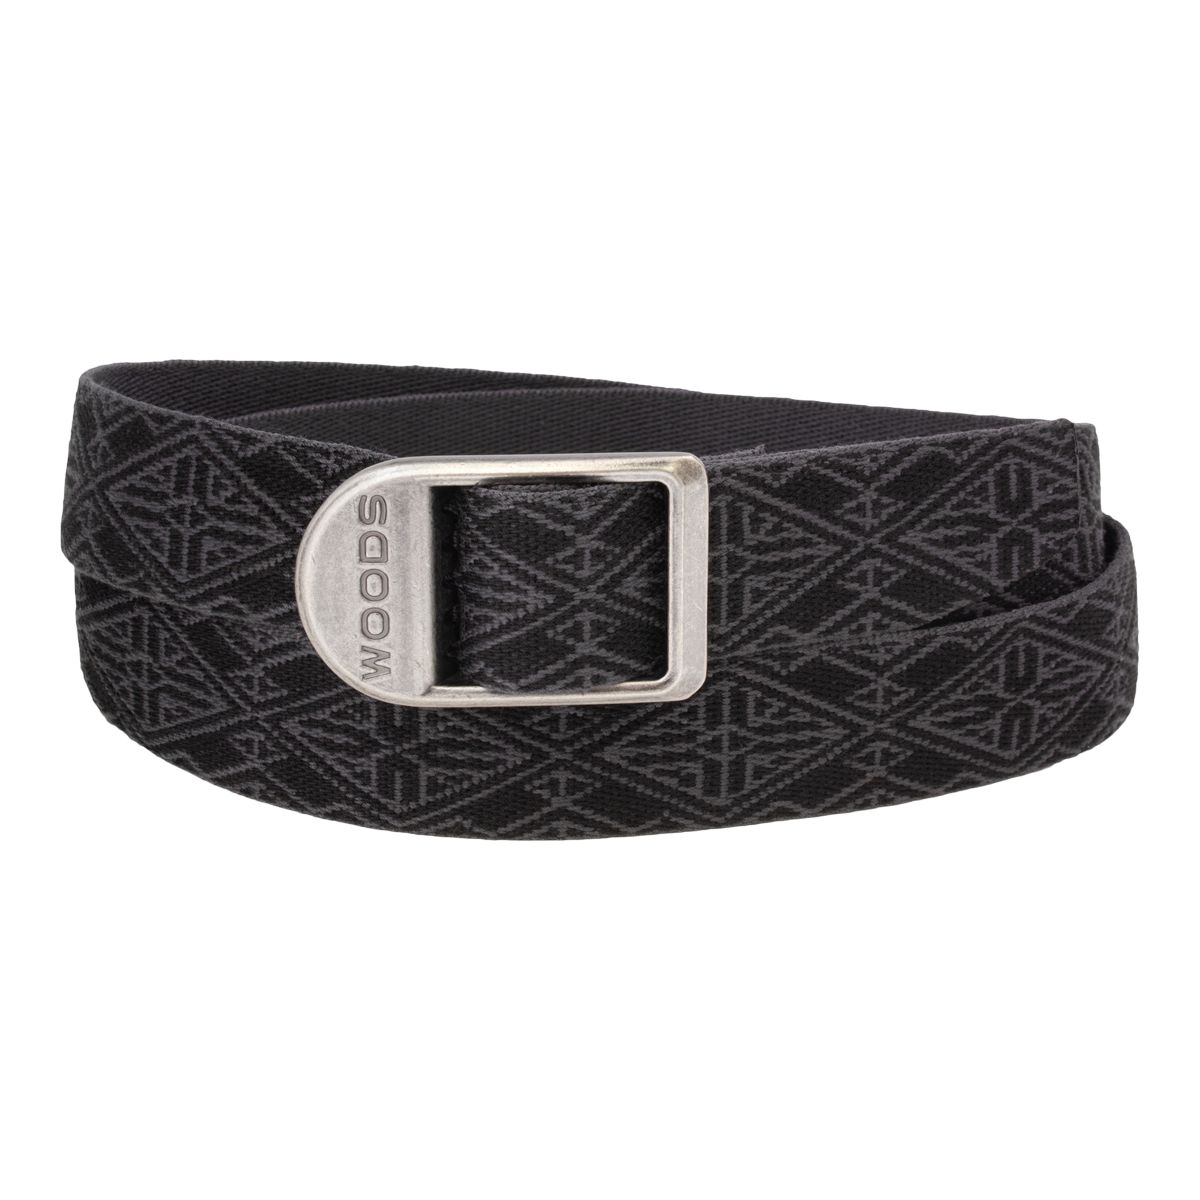 Woods Women's Trail To Cocktail Belt